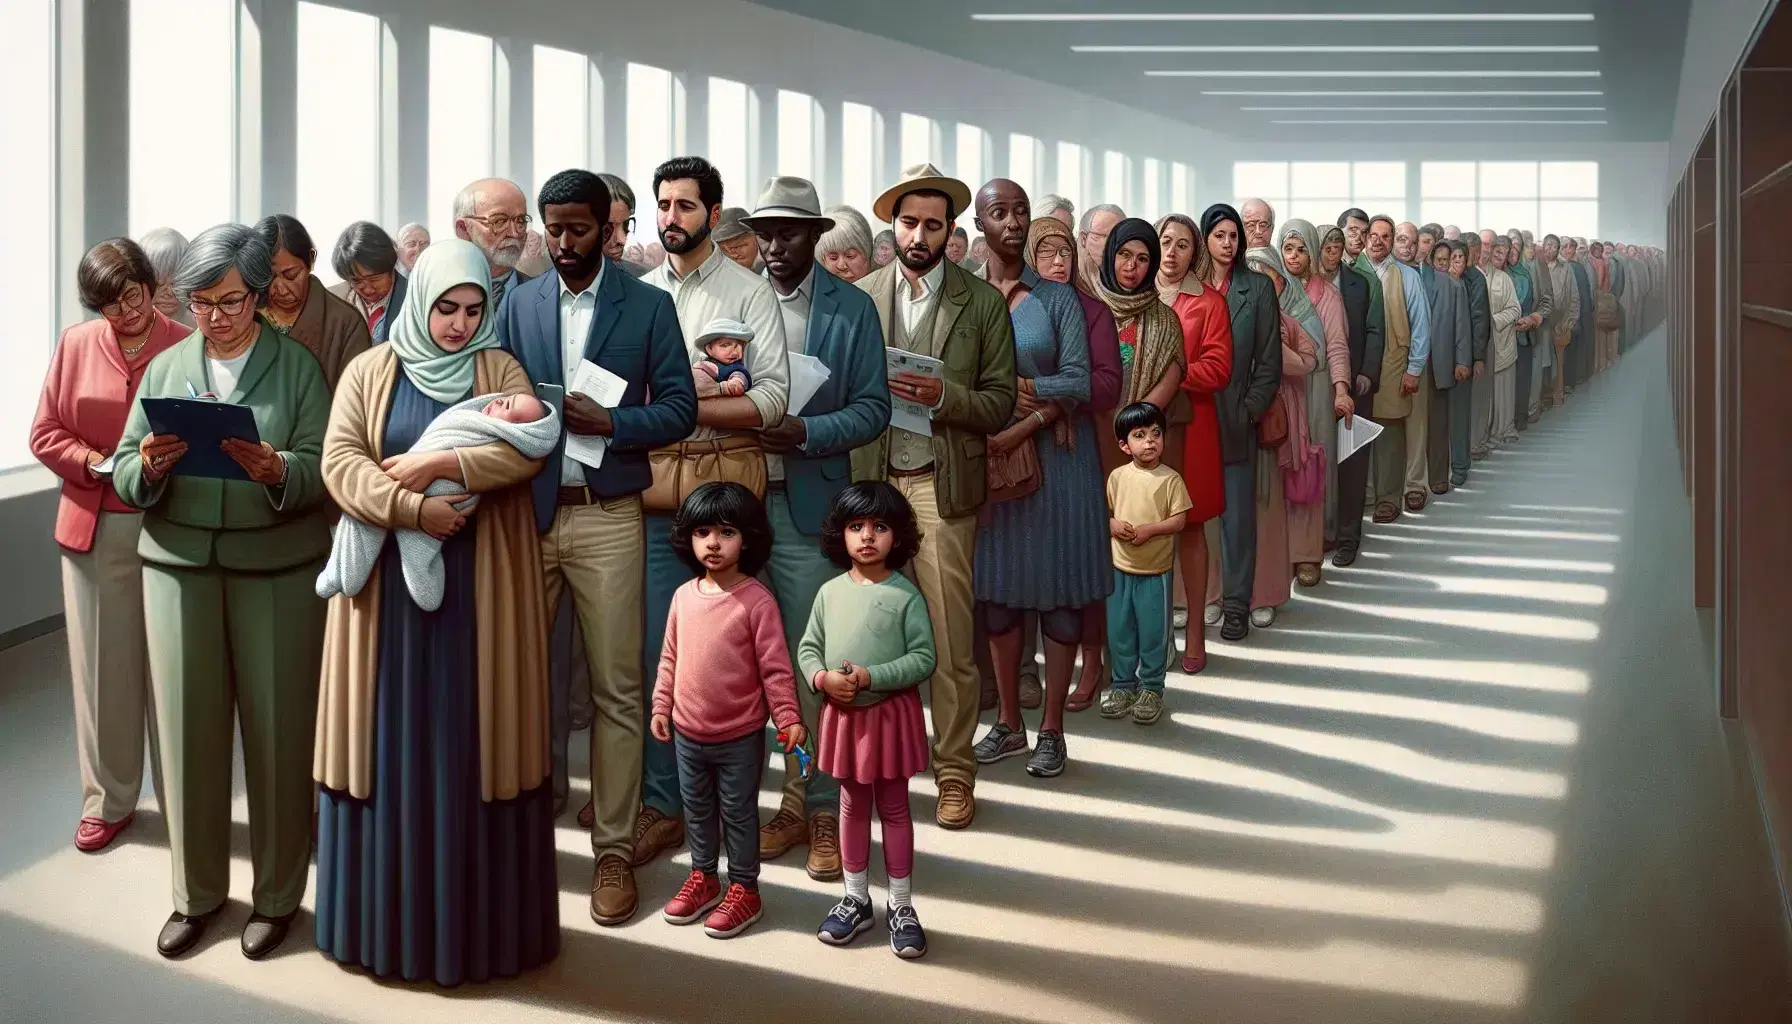 Diverse group of people in line holding documents, including a Middle-Eastern family, reflecting anticipation in a softly lit indoor setting.